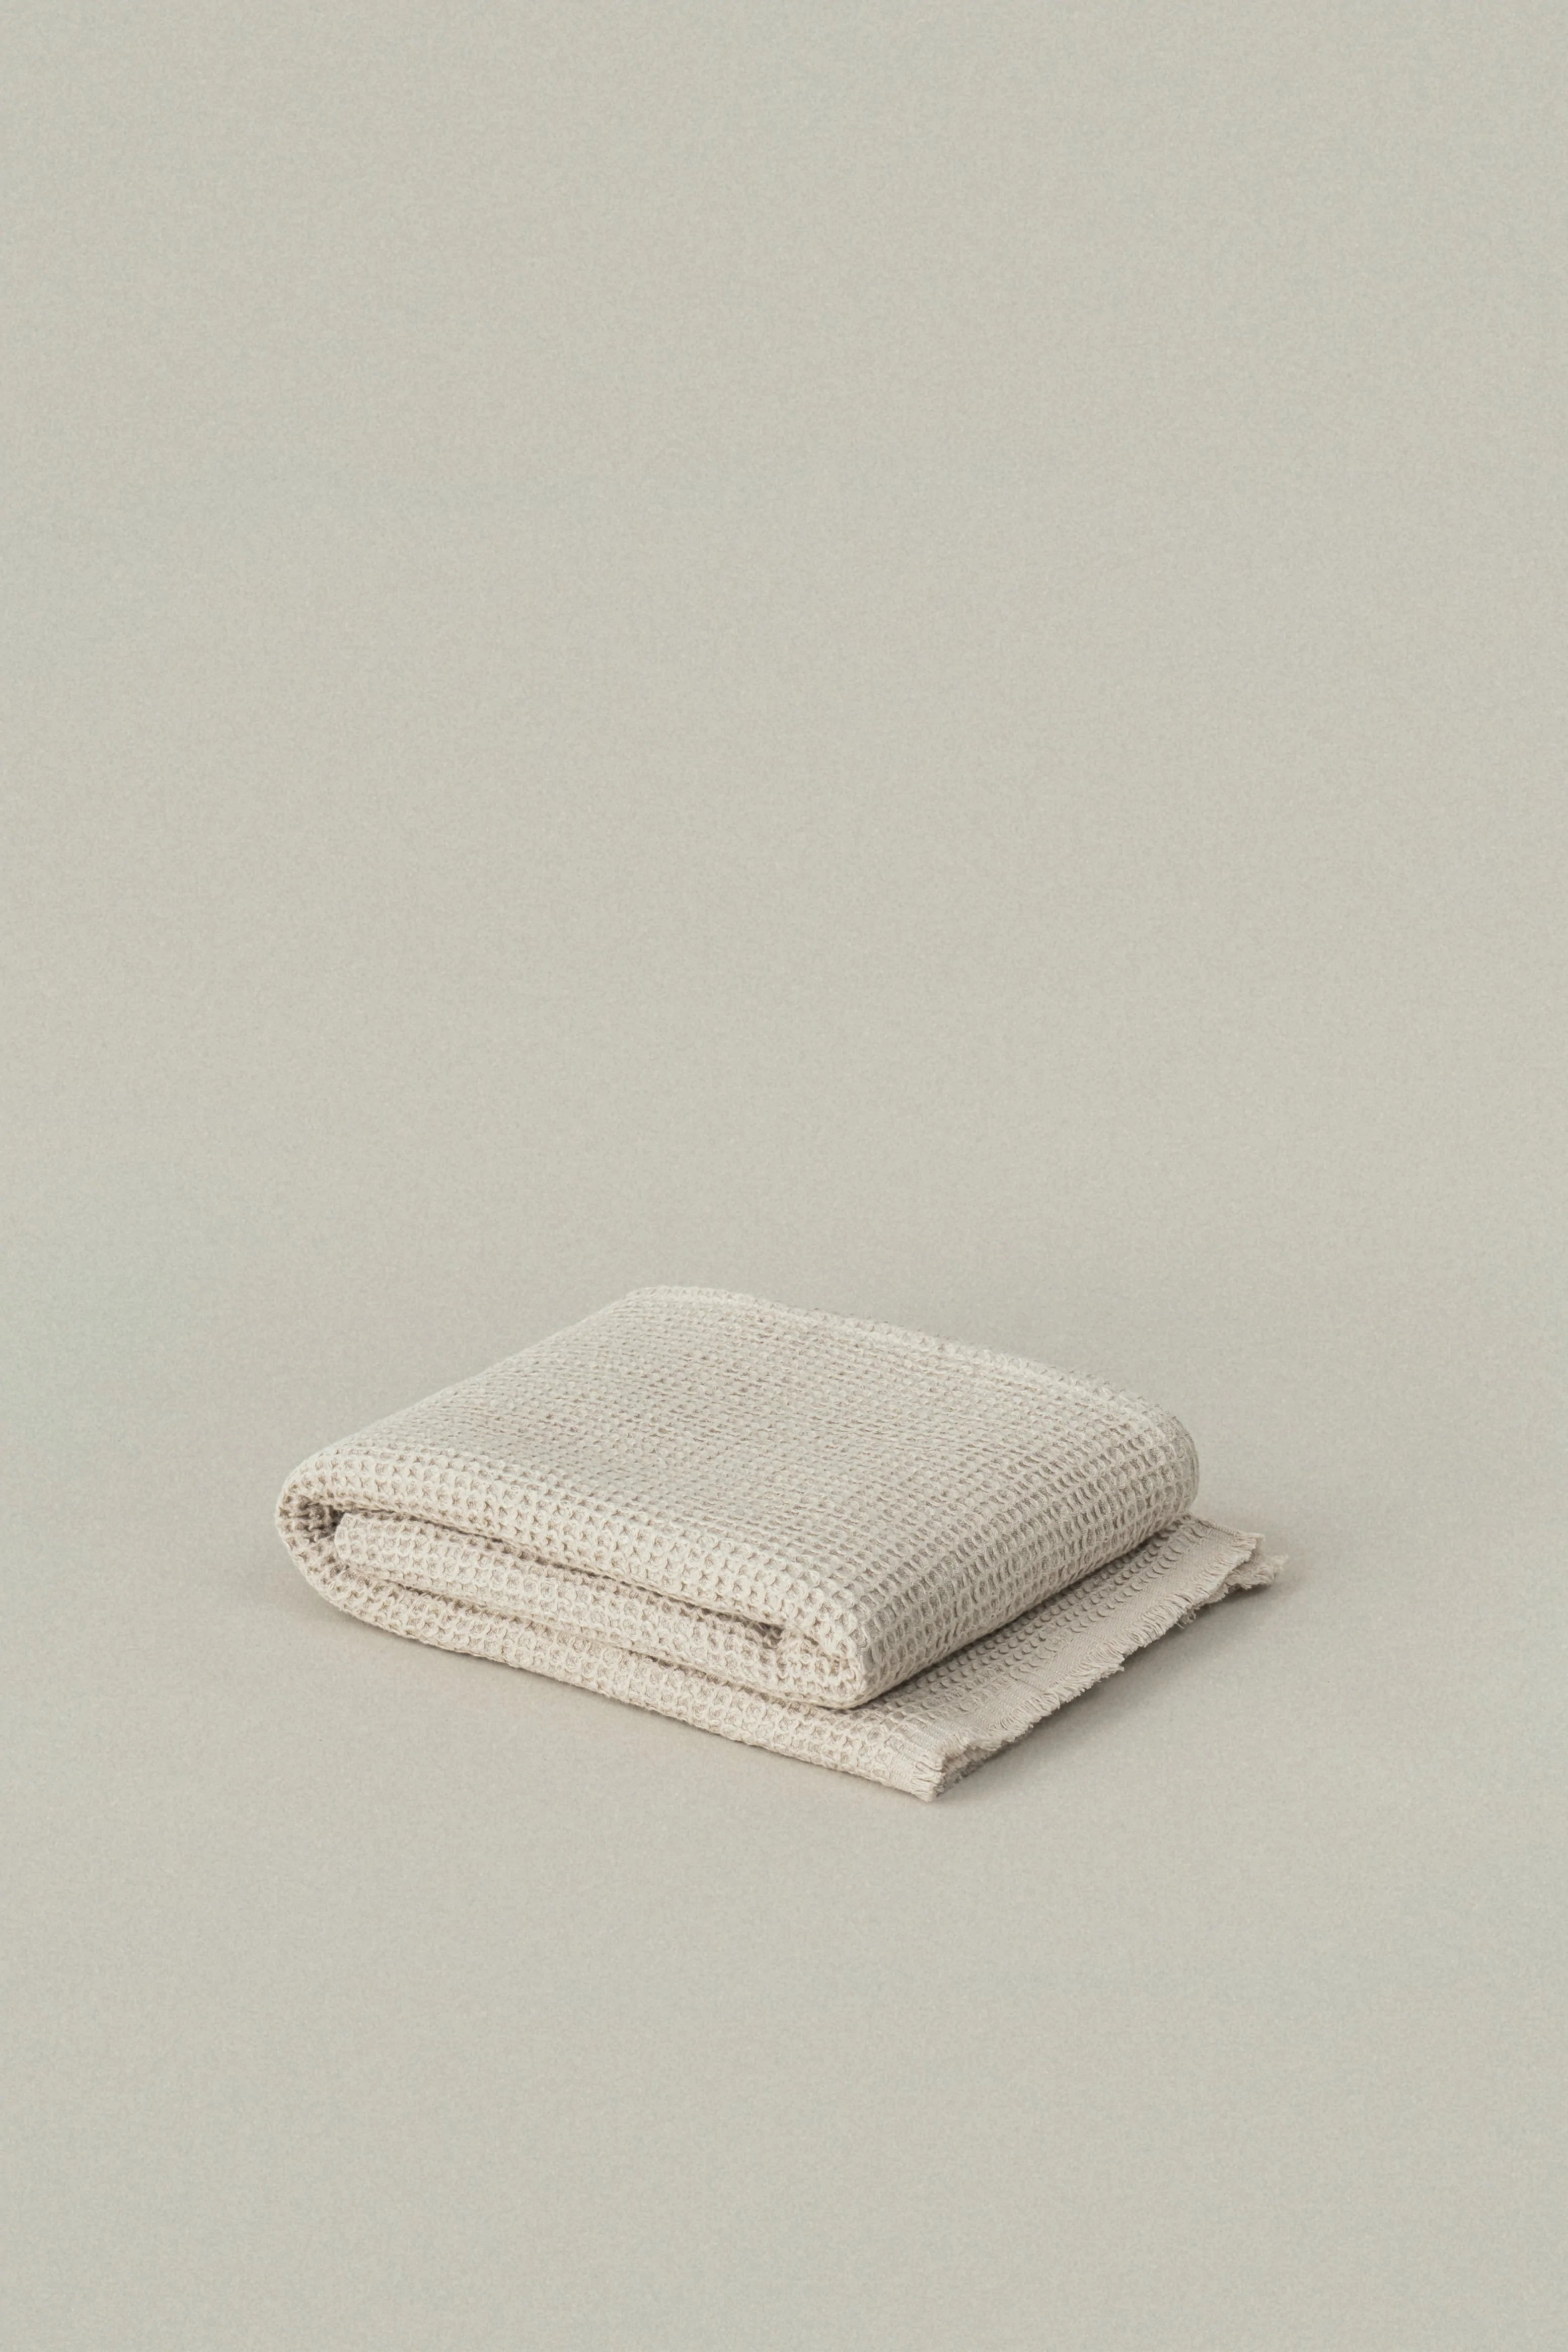 Warm Oatmeal Everyday Waffle Towels - featured